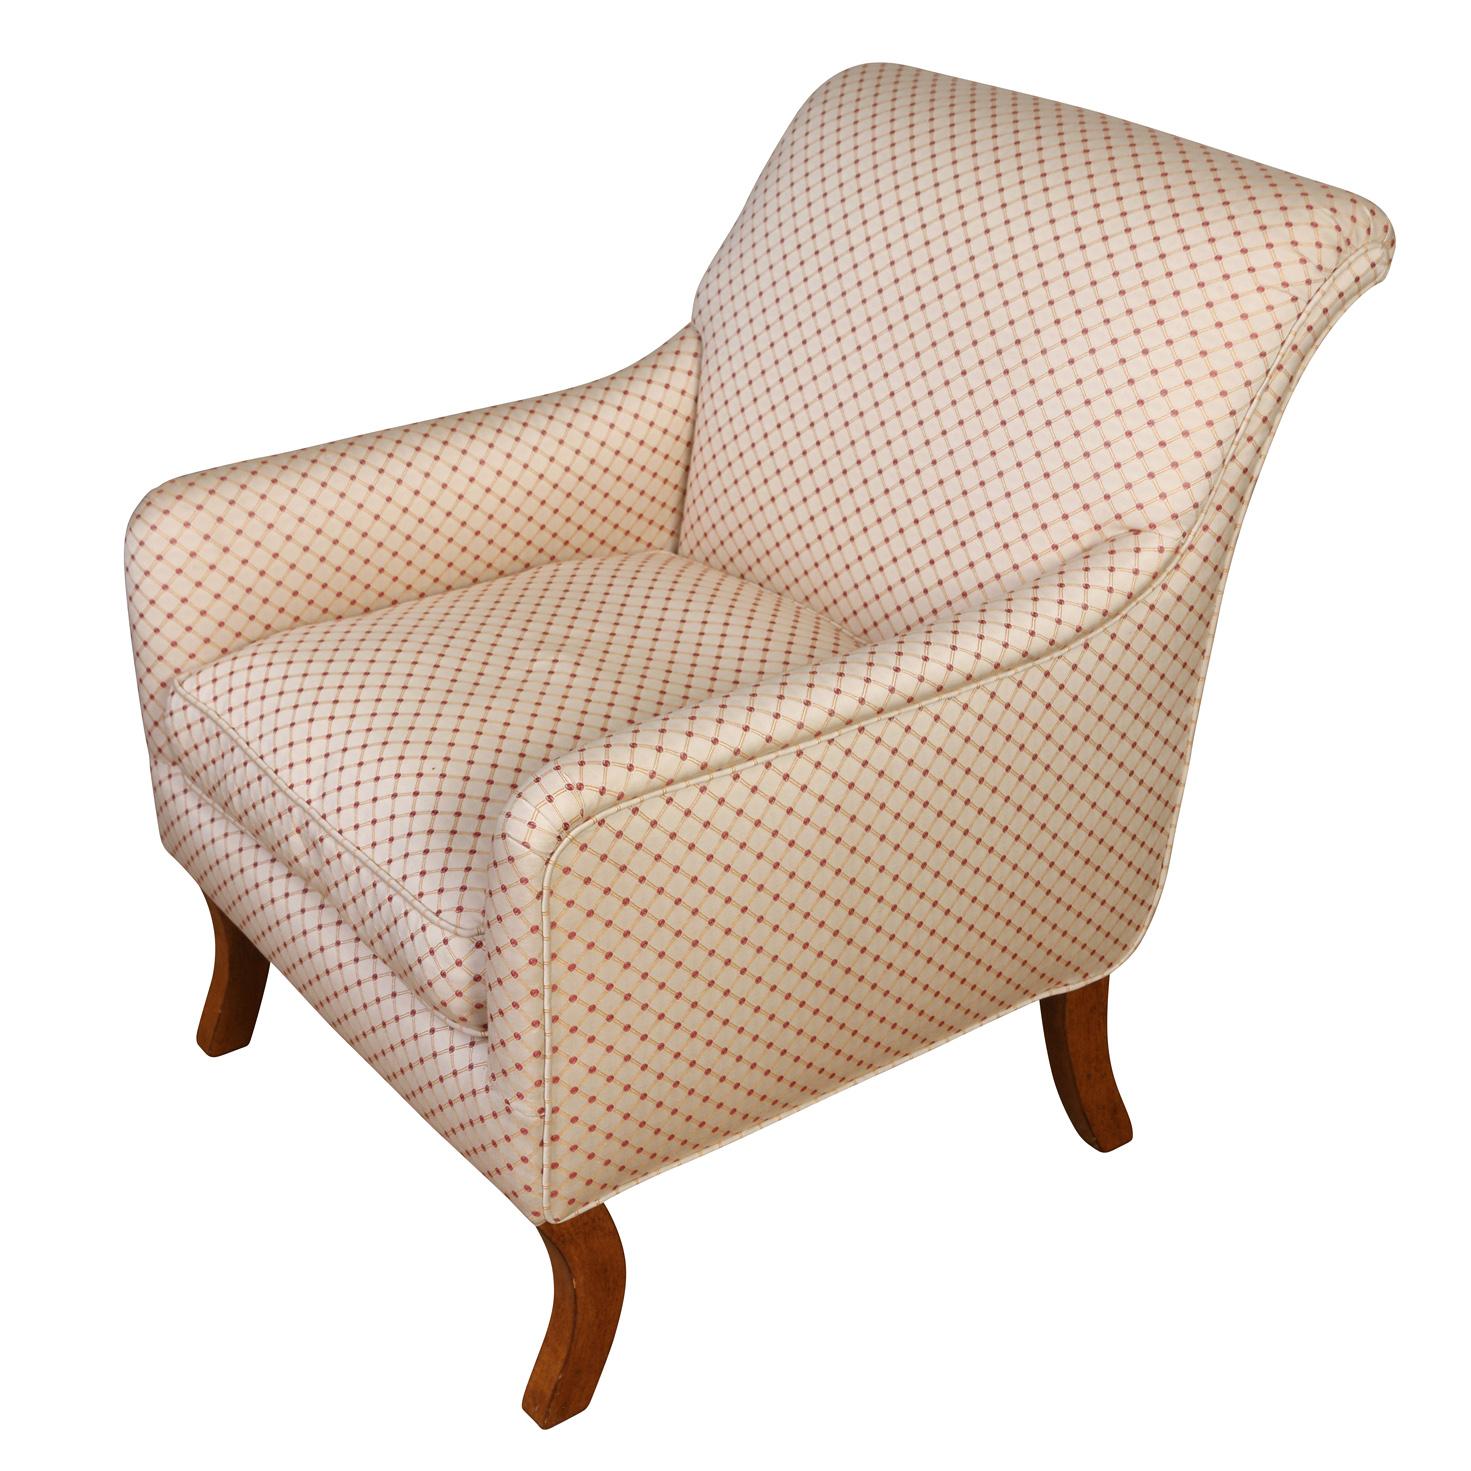 A vintage upholstered club chair in modern style with a flared back, narrow arms and slender light wood legs. Fabric upholstery is a neutral cream ground with a red and gold diamond geometric design. Chair is made by A. Rudin.